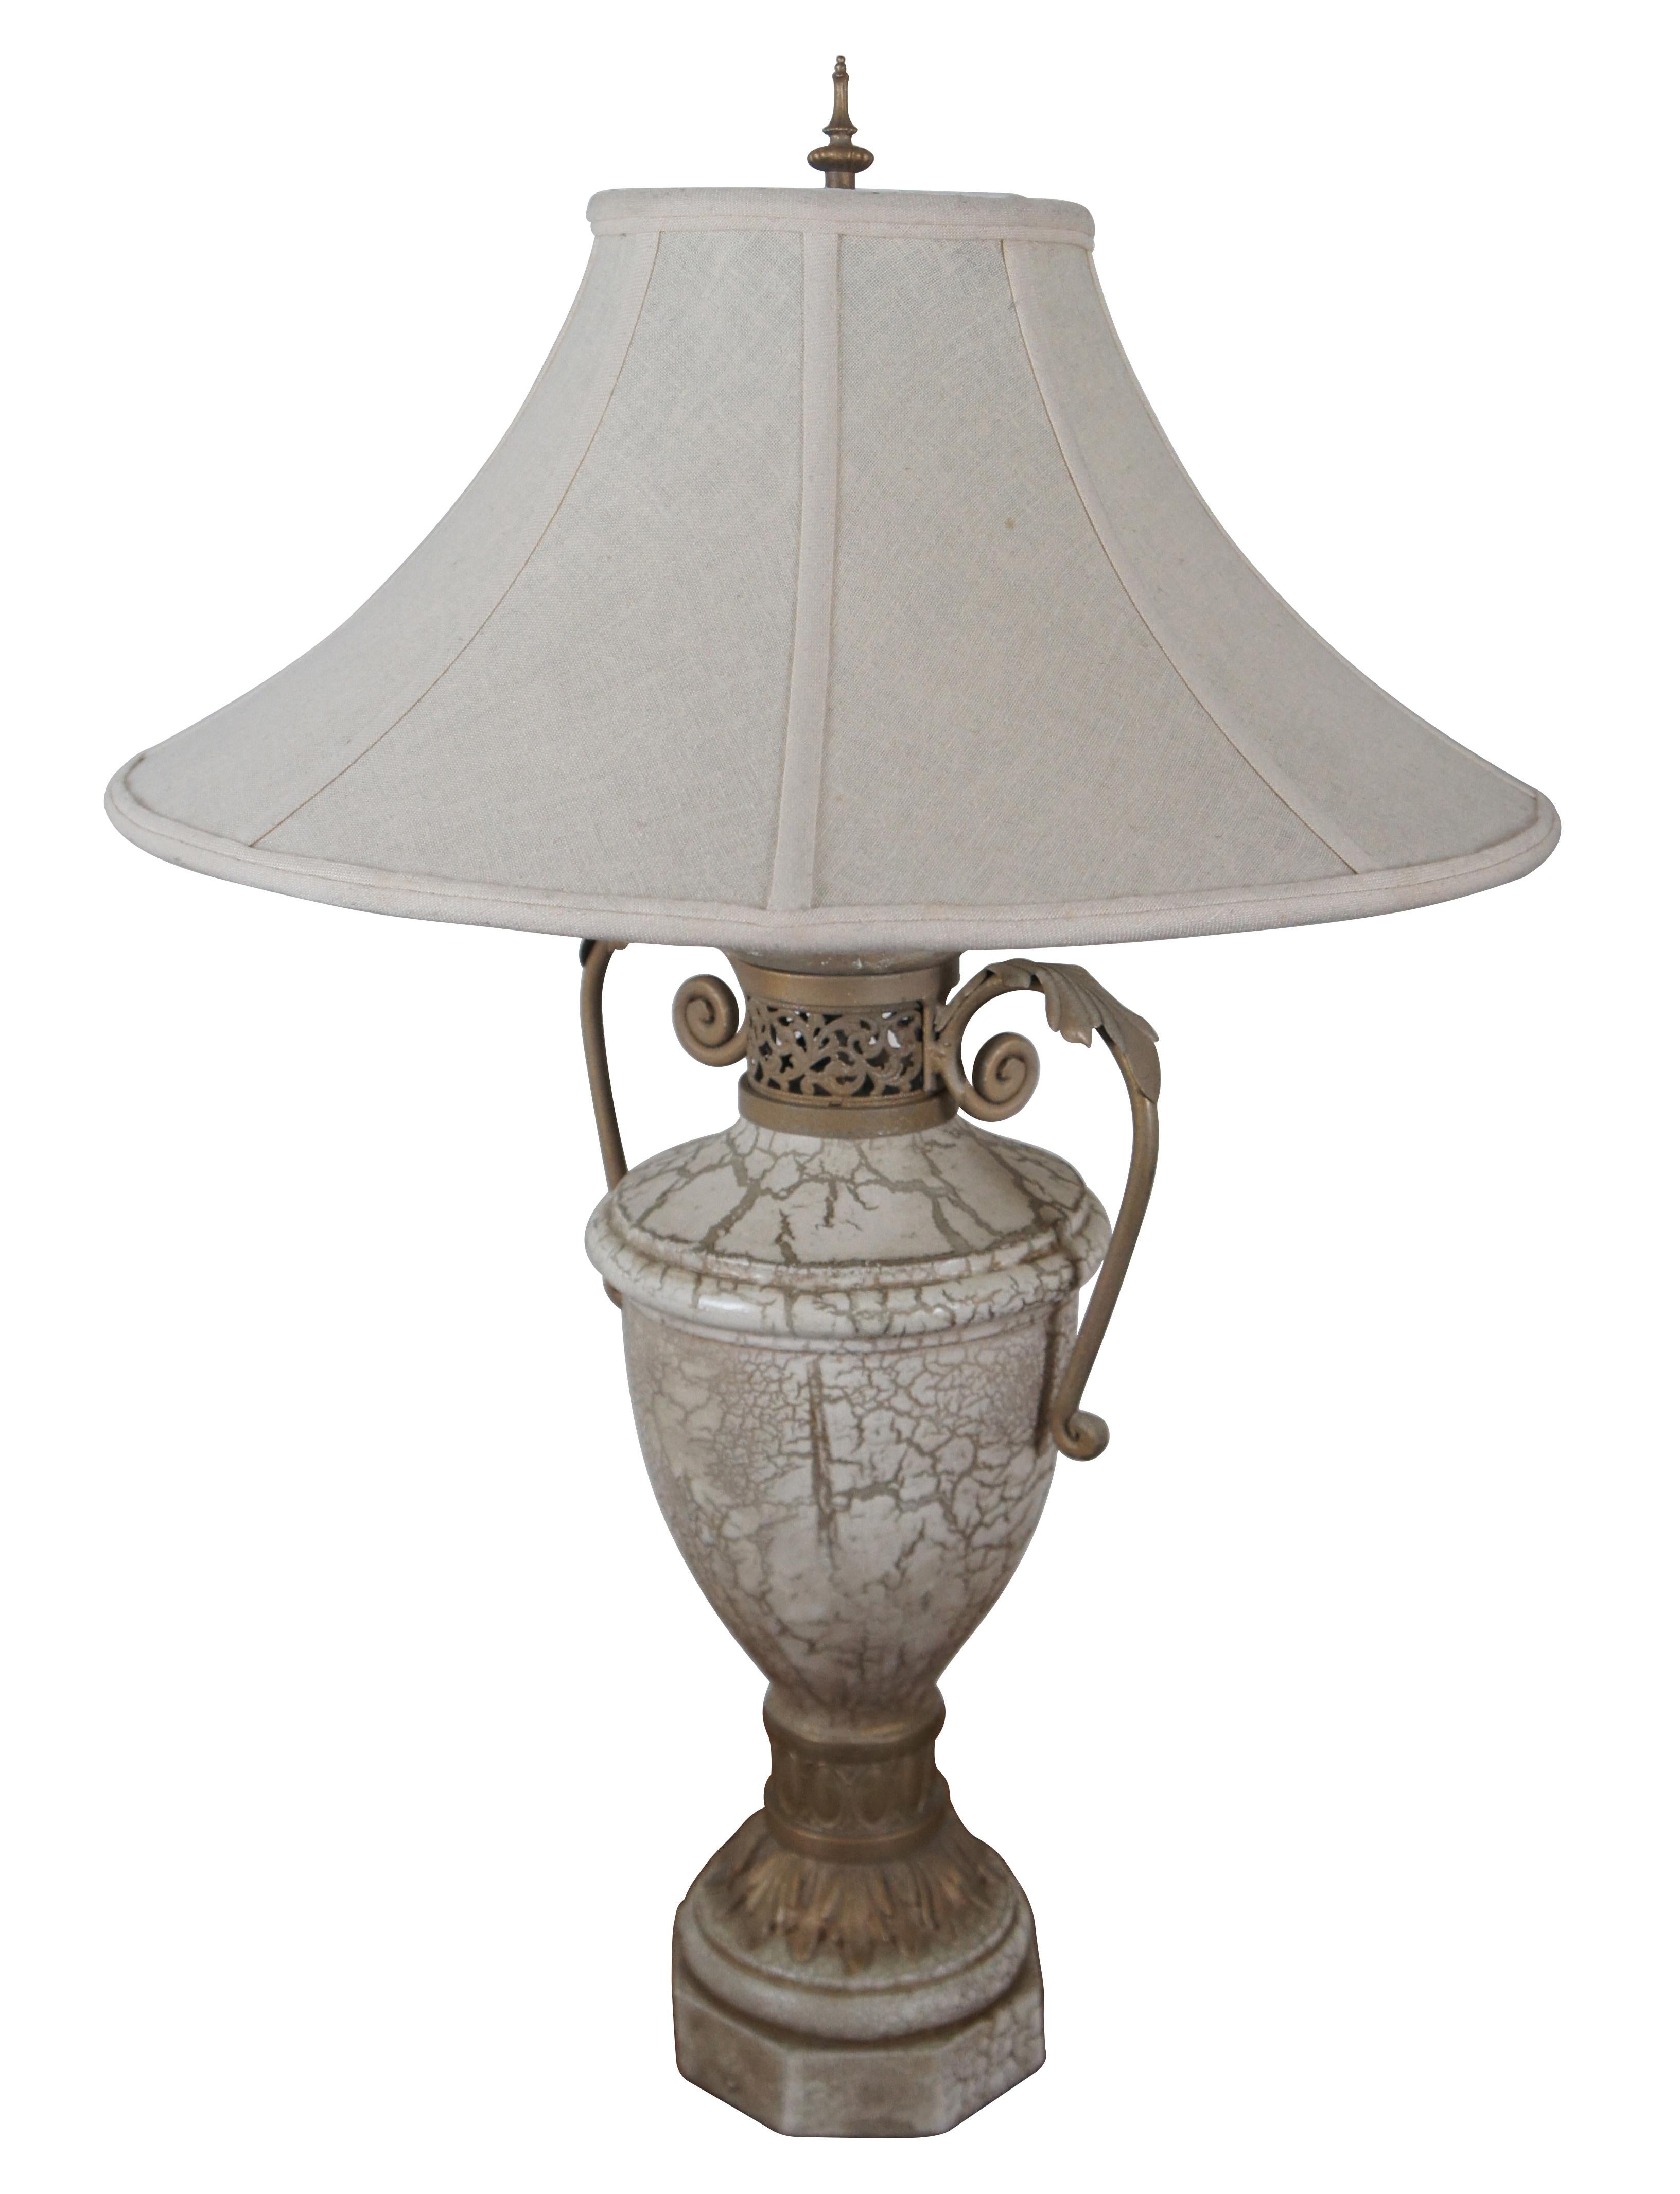 Pair of Neoclassical table lamps by the Ultimate Manufacturing Company, 1998. Trophy urn shaped in painted plaster with a white and gold marbled / crackle finish and painted metal collar and handles. White linen shades.


12.5” x 8.5” x 26” /